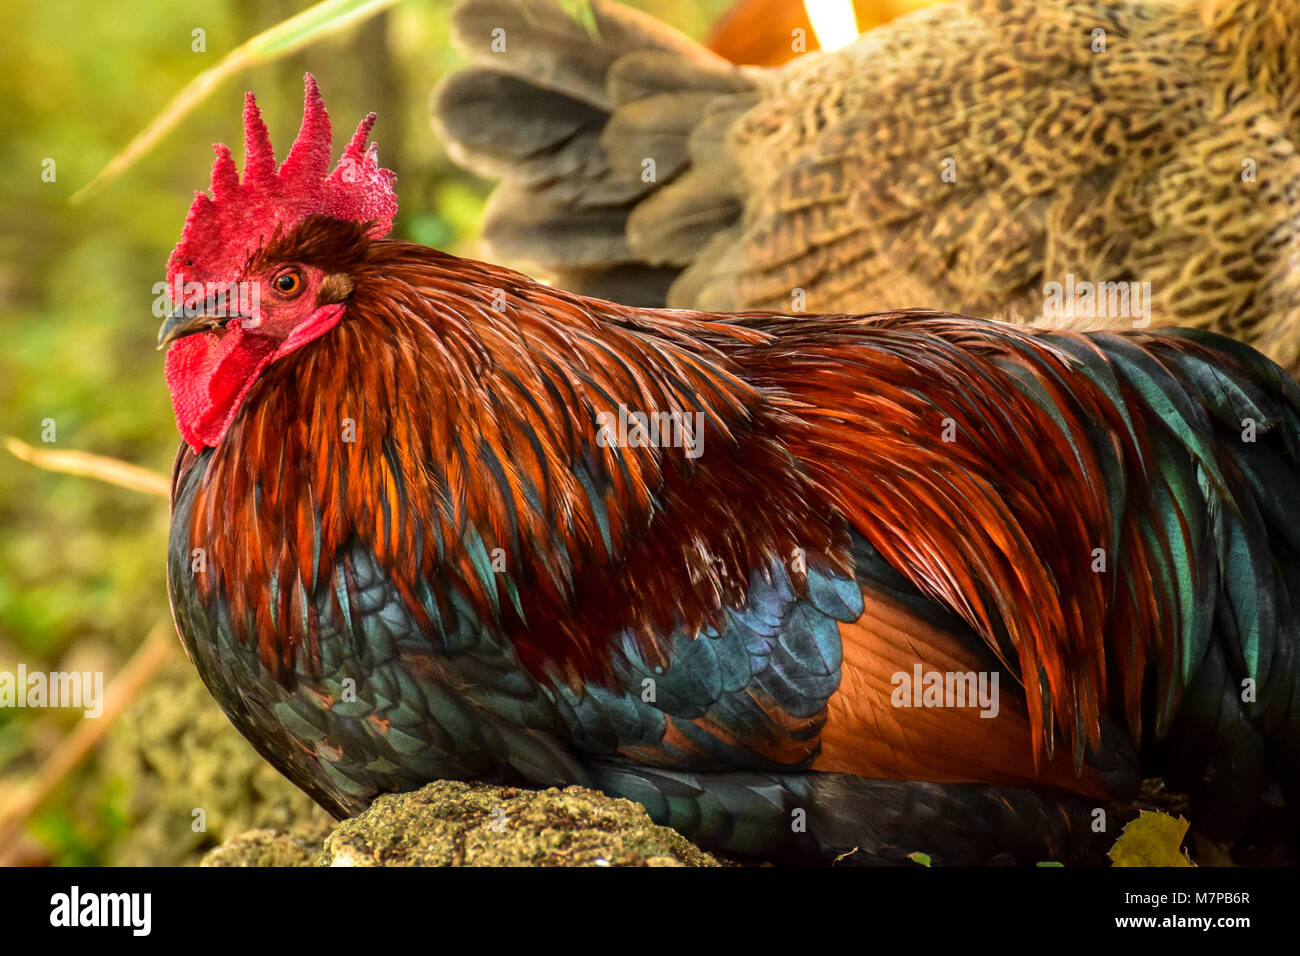 Close up of a cockerel with colourful feathers Stock Photo